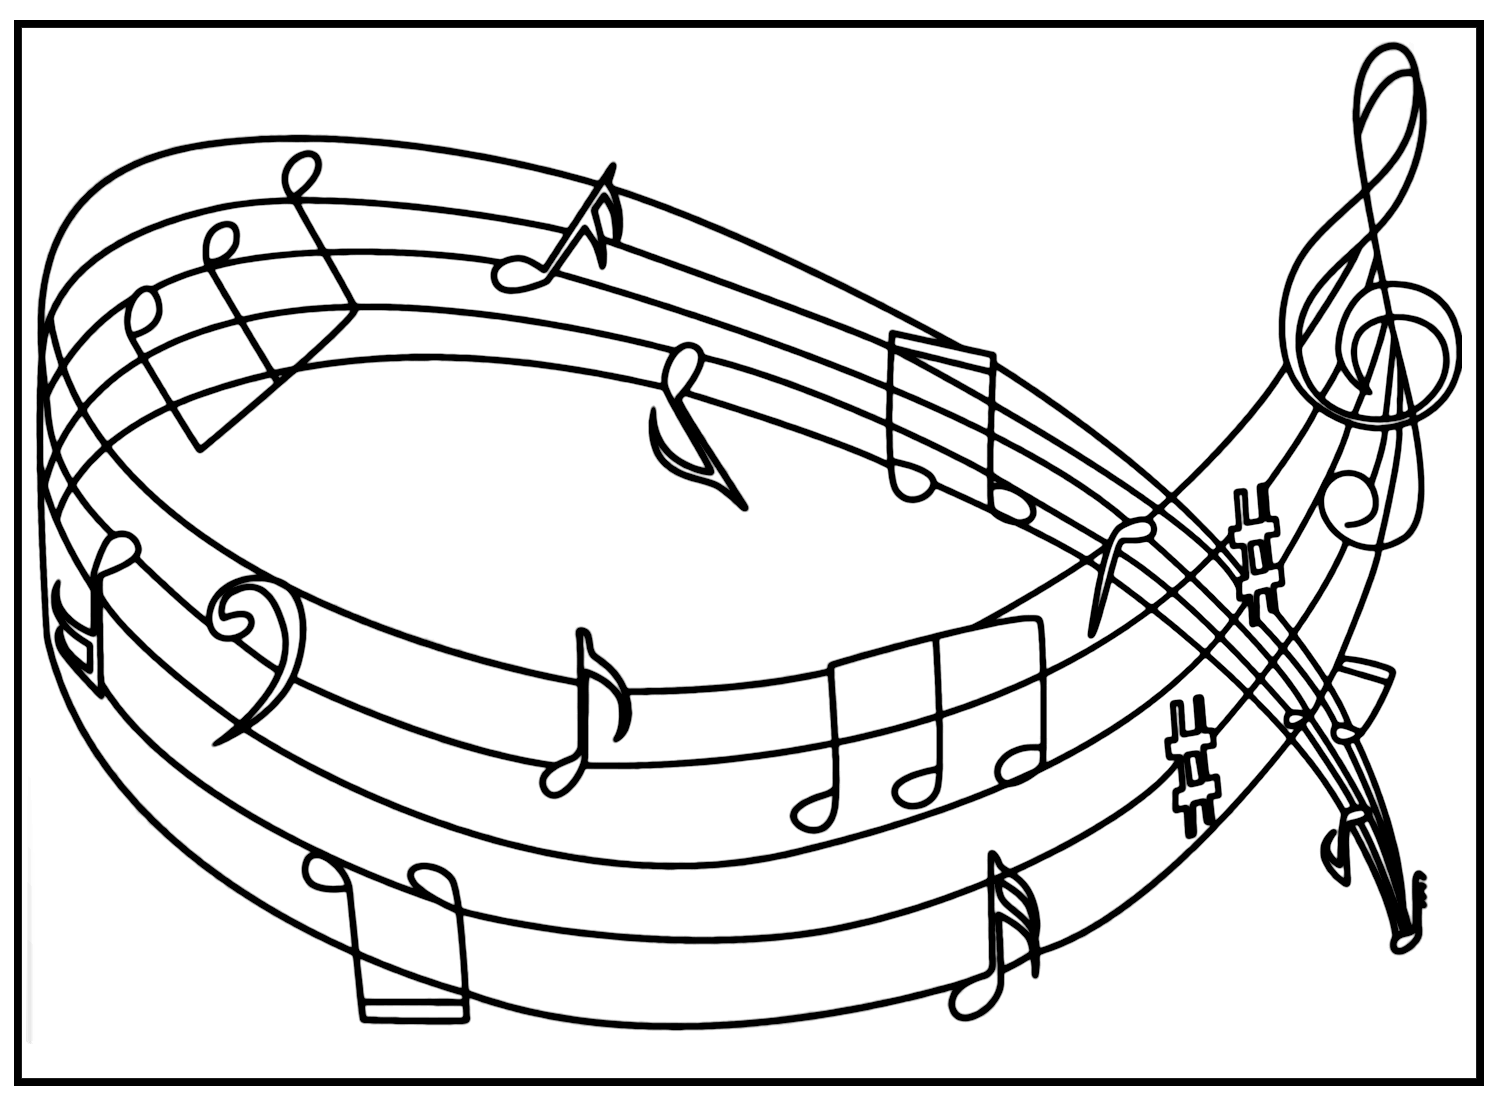 Musical Notes Images Coloring Page